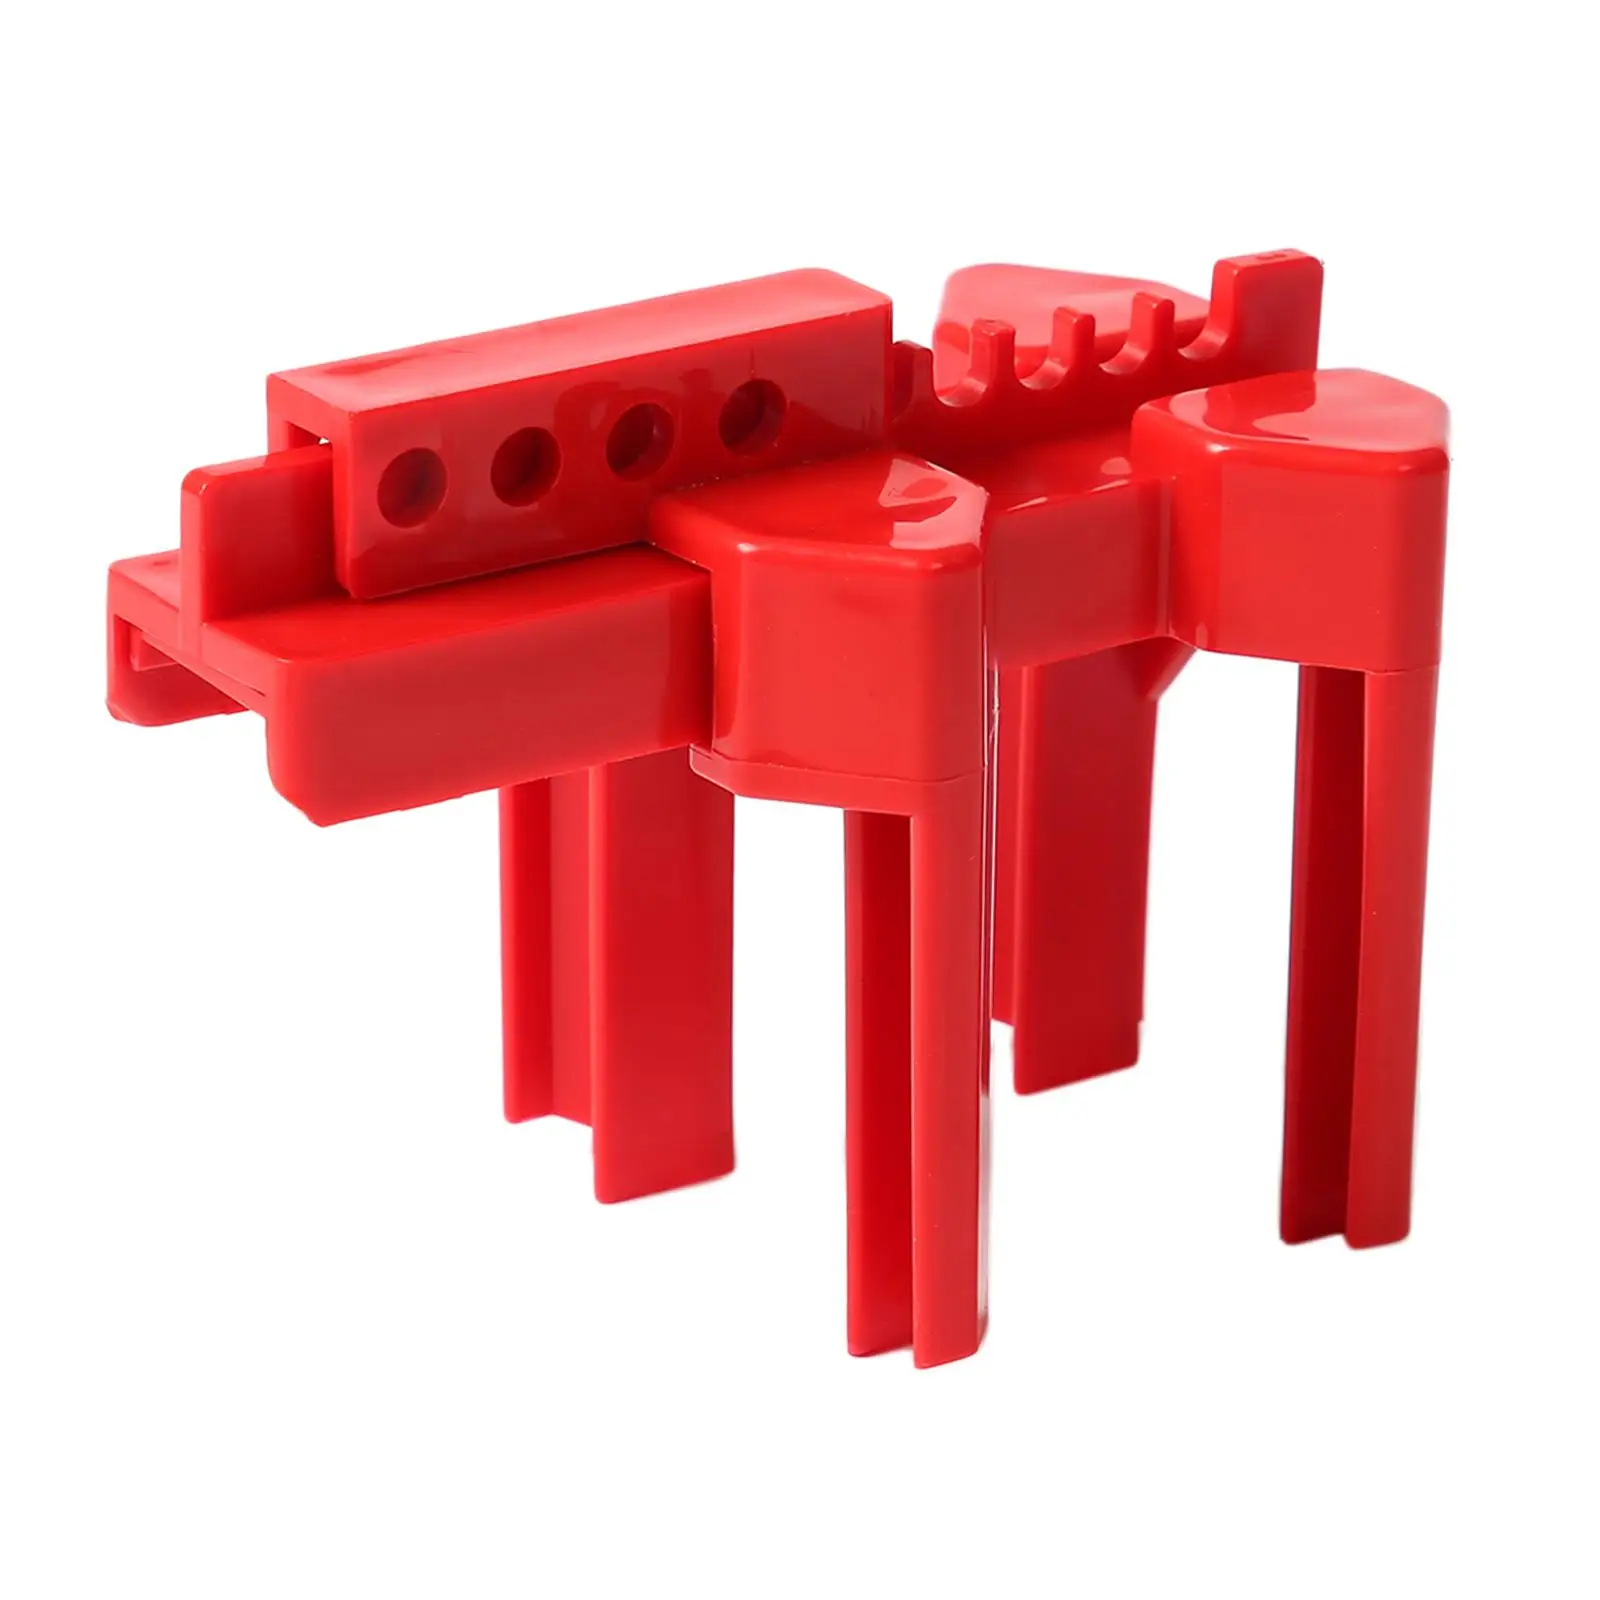 Ball Valve Lockout Outside Pipe Lock Practical Durable Adjustable Sturdy Red Valve Lock for Industrial Transportation